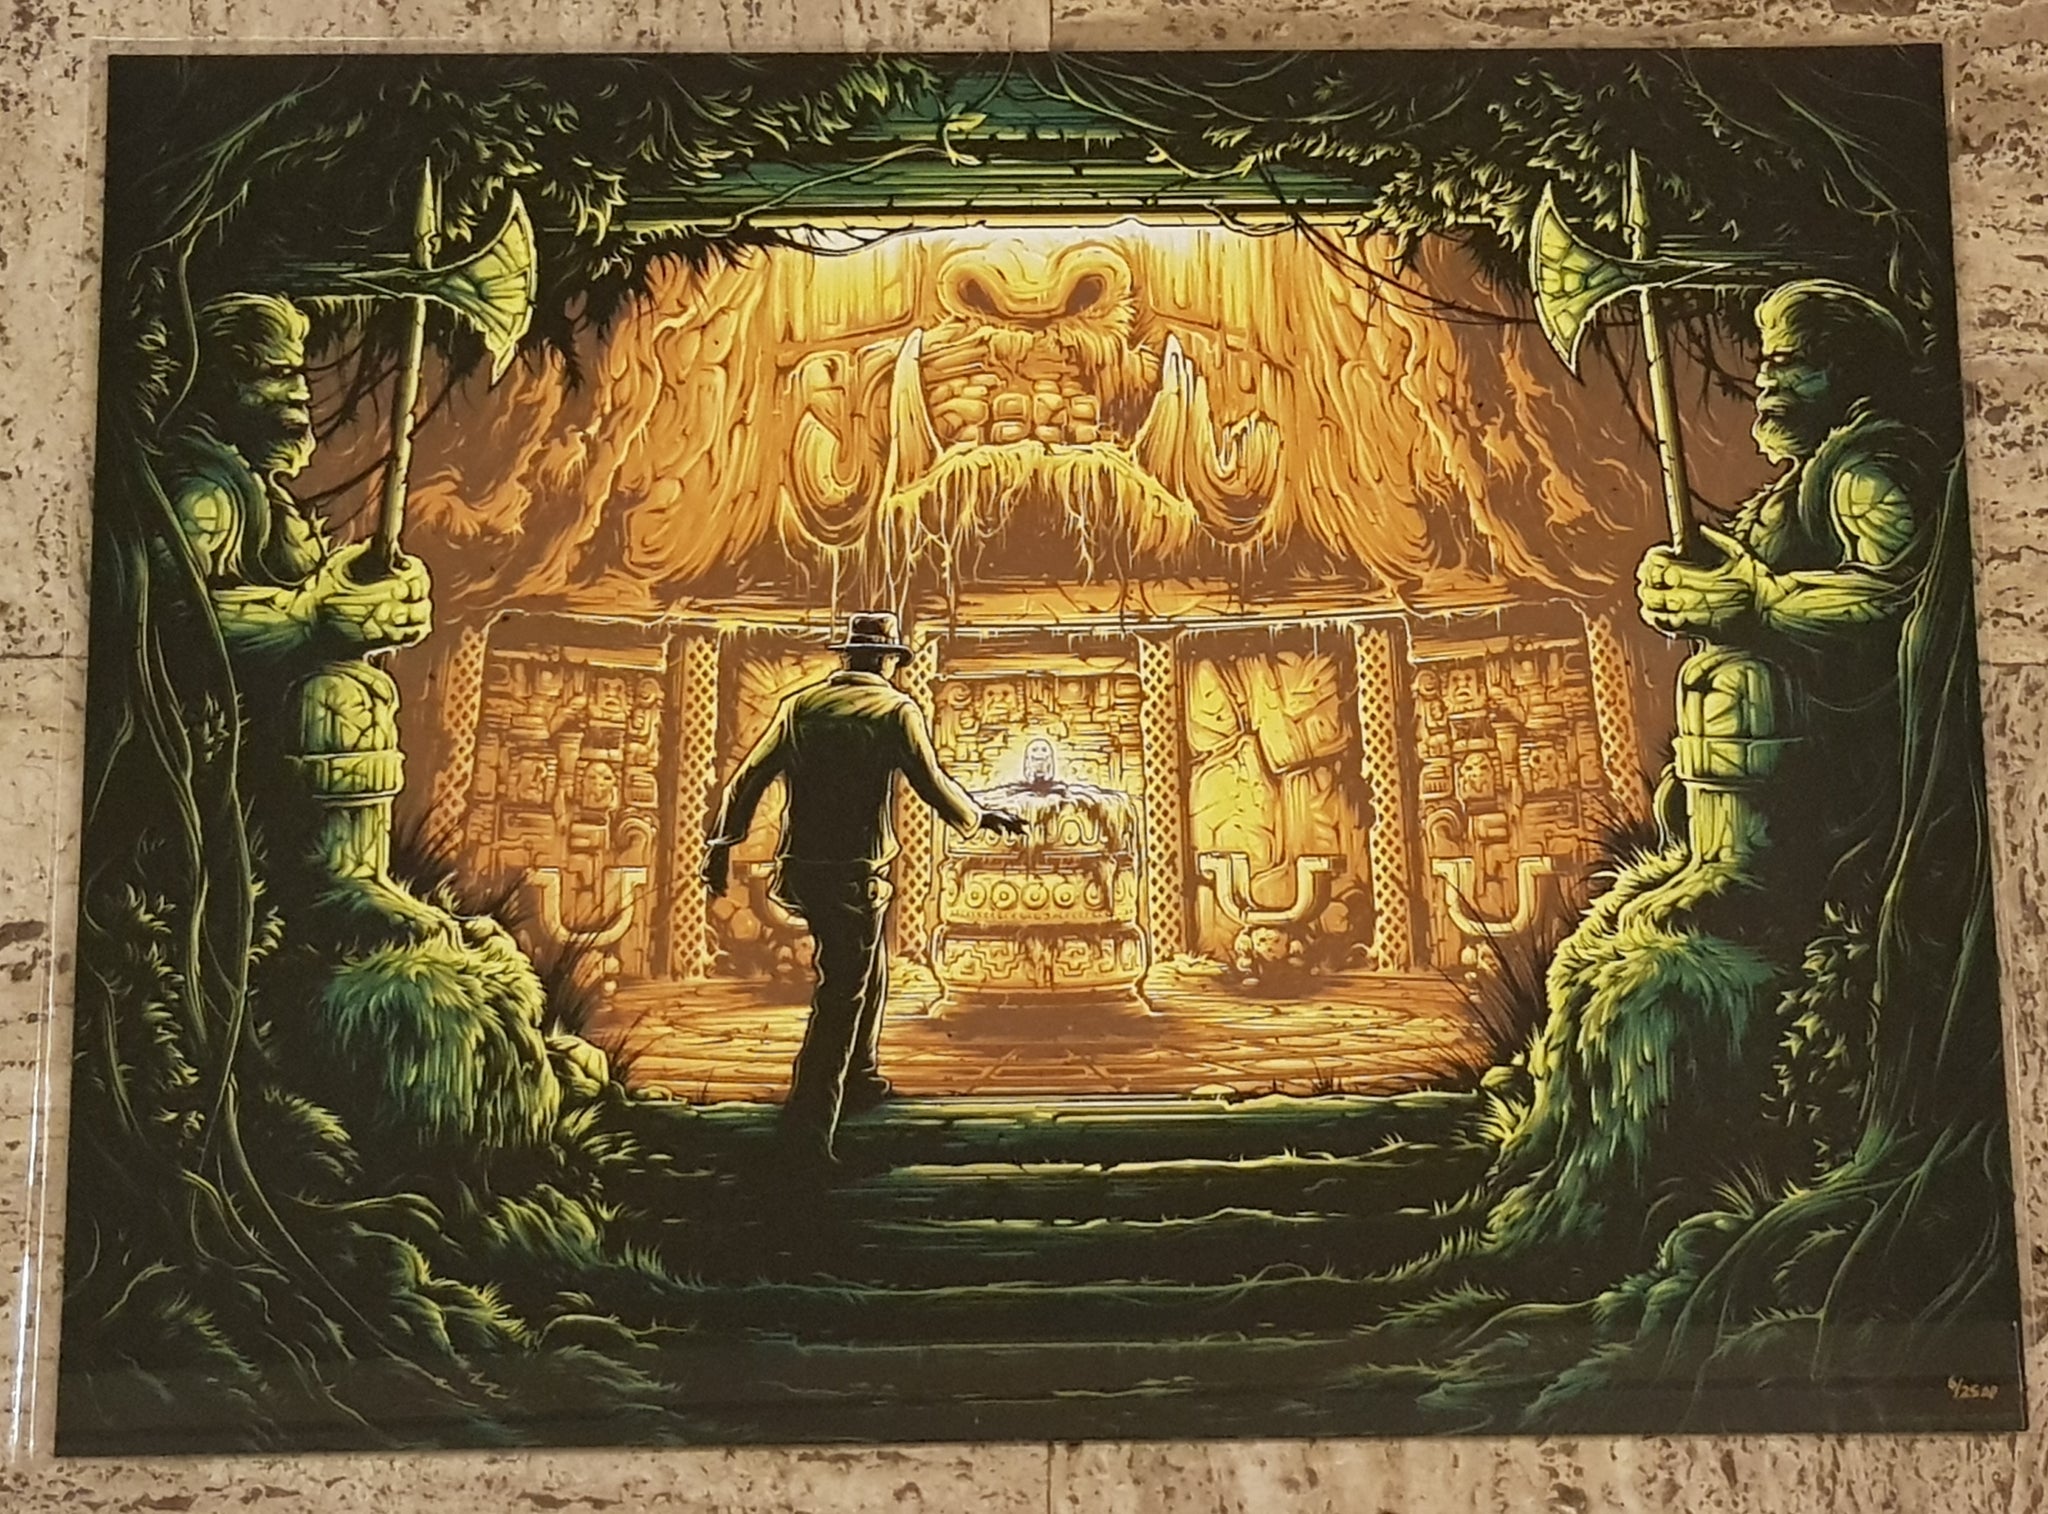 Indiana Jones "There is Nothing to Fear Here" - Dan Mumford Limited Edition Screen Print (AP)